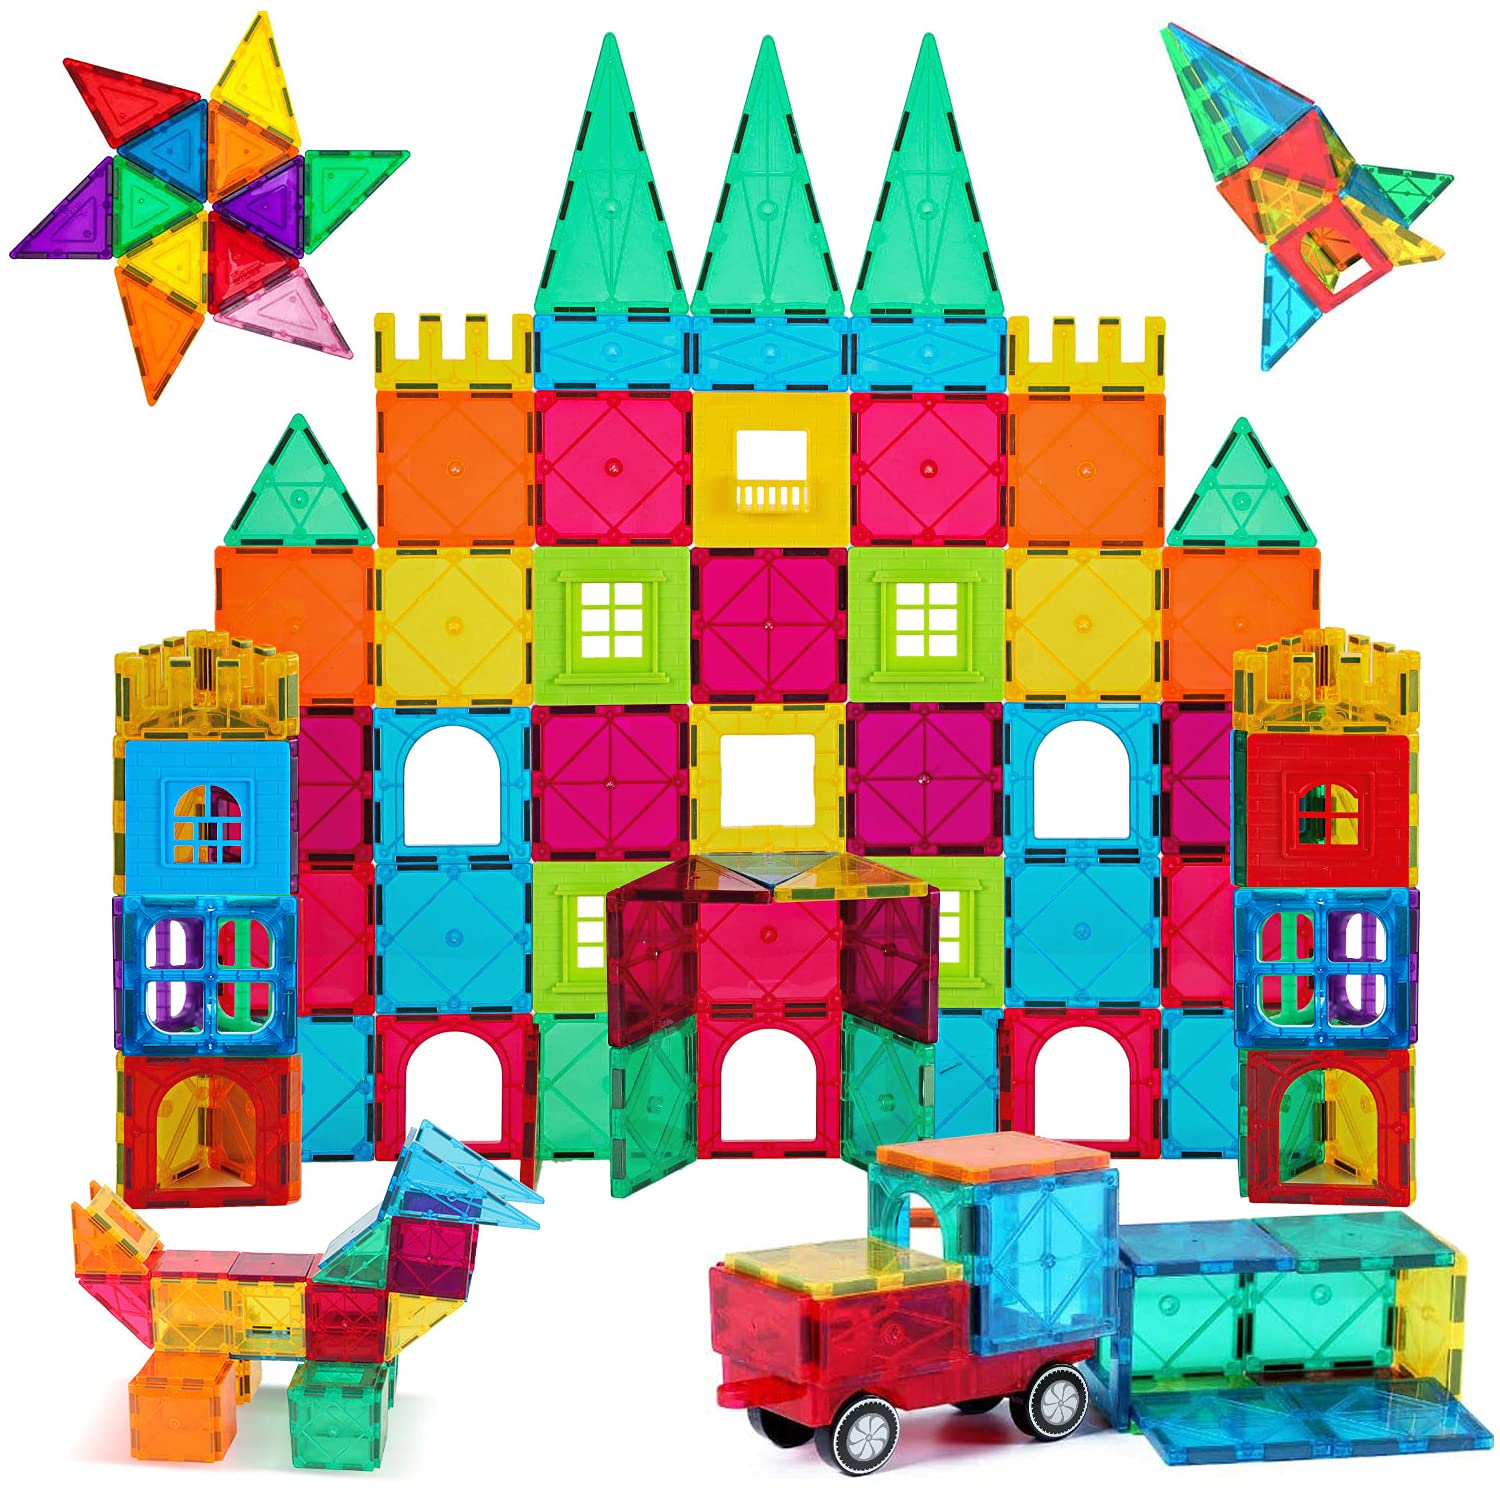 AFUNX 130 PCS Magnetic Tiles Building Blocks 3D Clear Magnetic Blocks Construction Playboards, Inspiration Building Tiles Creativity Beyond Imagination, Educational Magnet Toy Set for Kids with 2 Cars